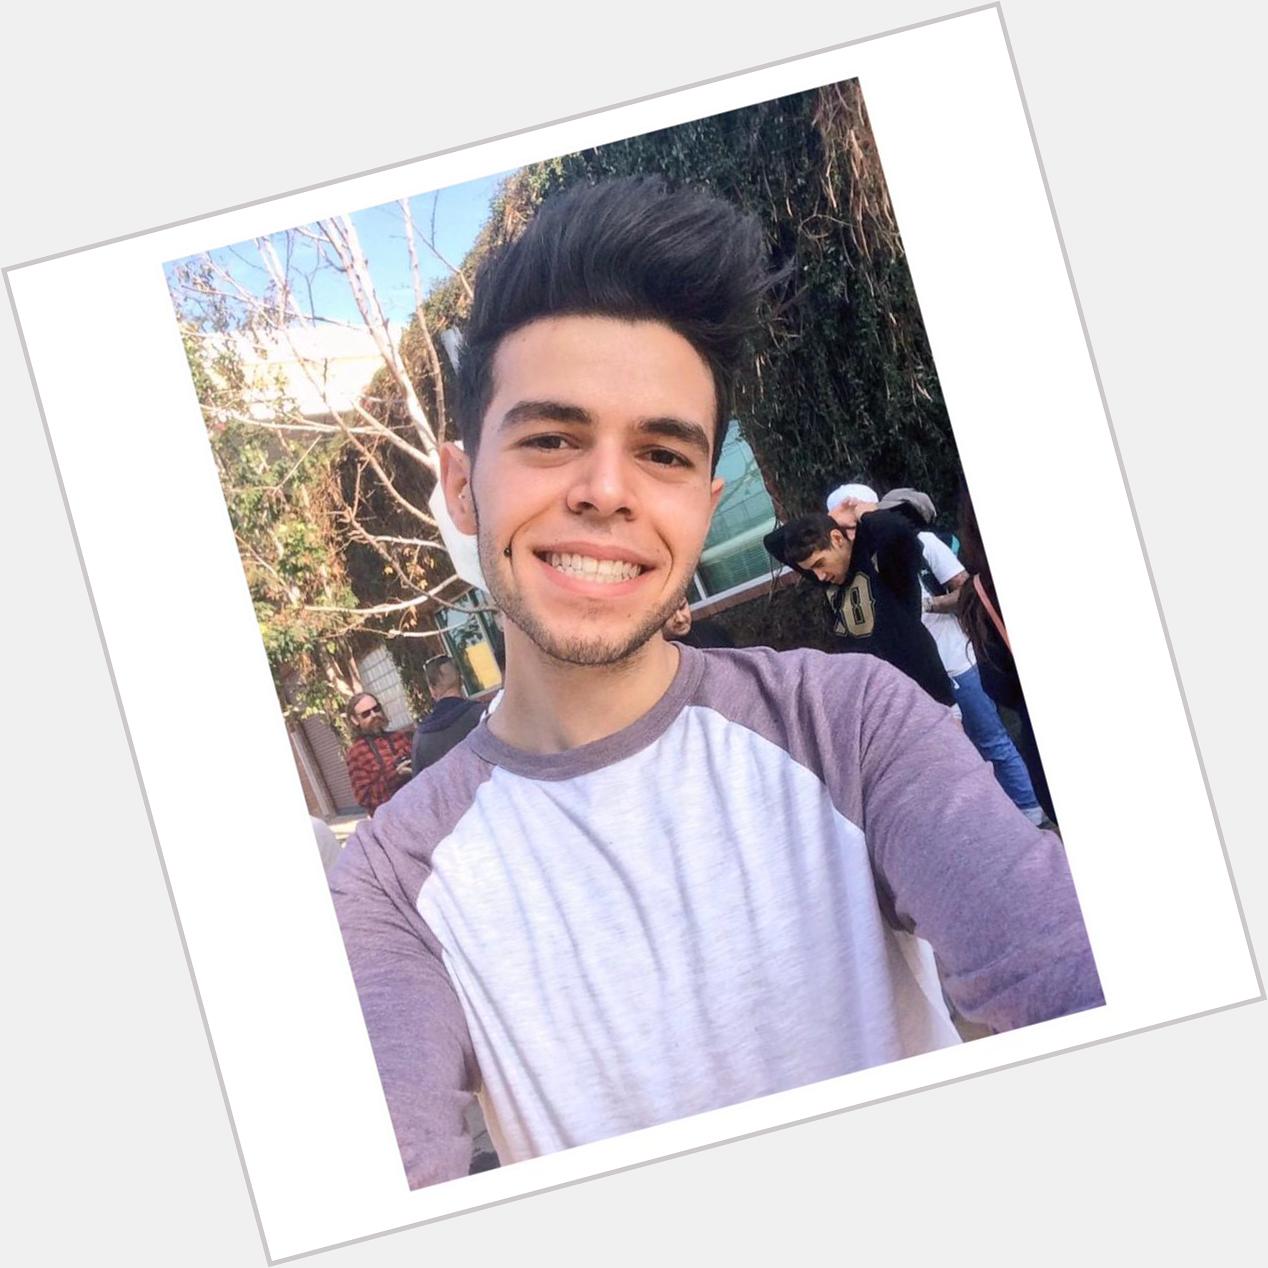 HAPPY BIRTHDAY TO THE MOST WONDERFUL GUY IN THE WHOLE WORLD, JAMES YAMMOUNI!! I LOVE YOU SO MUCH   